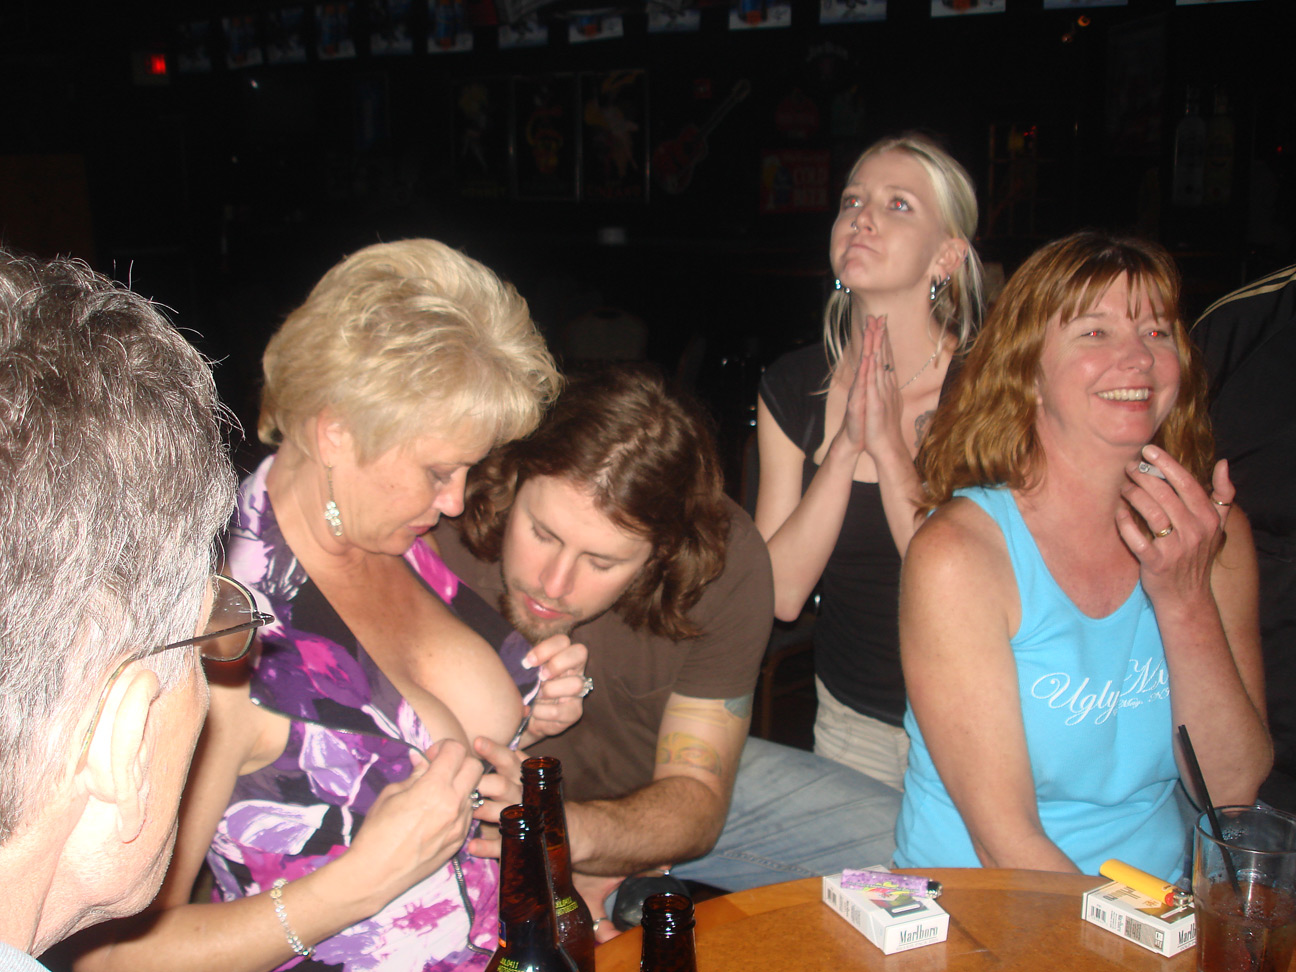 Our Real Tampa Swingers Monthly Bar Meet And Greet pic